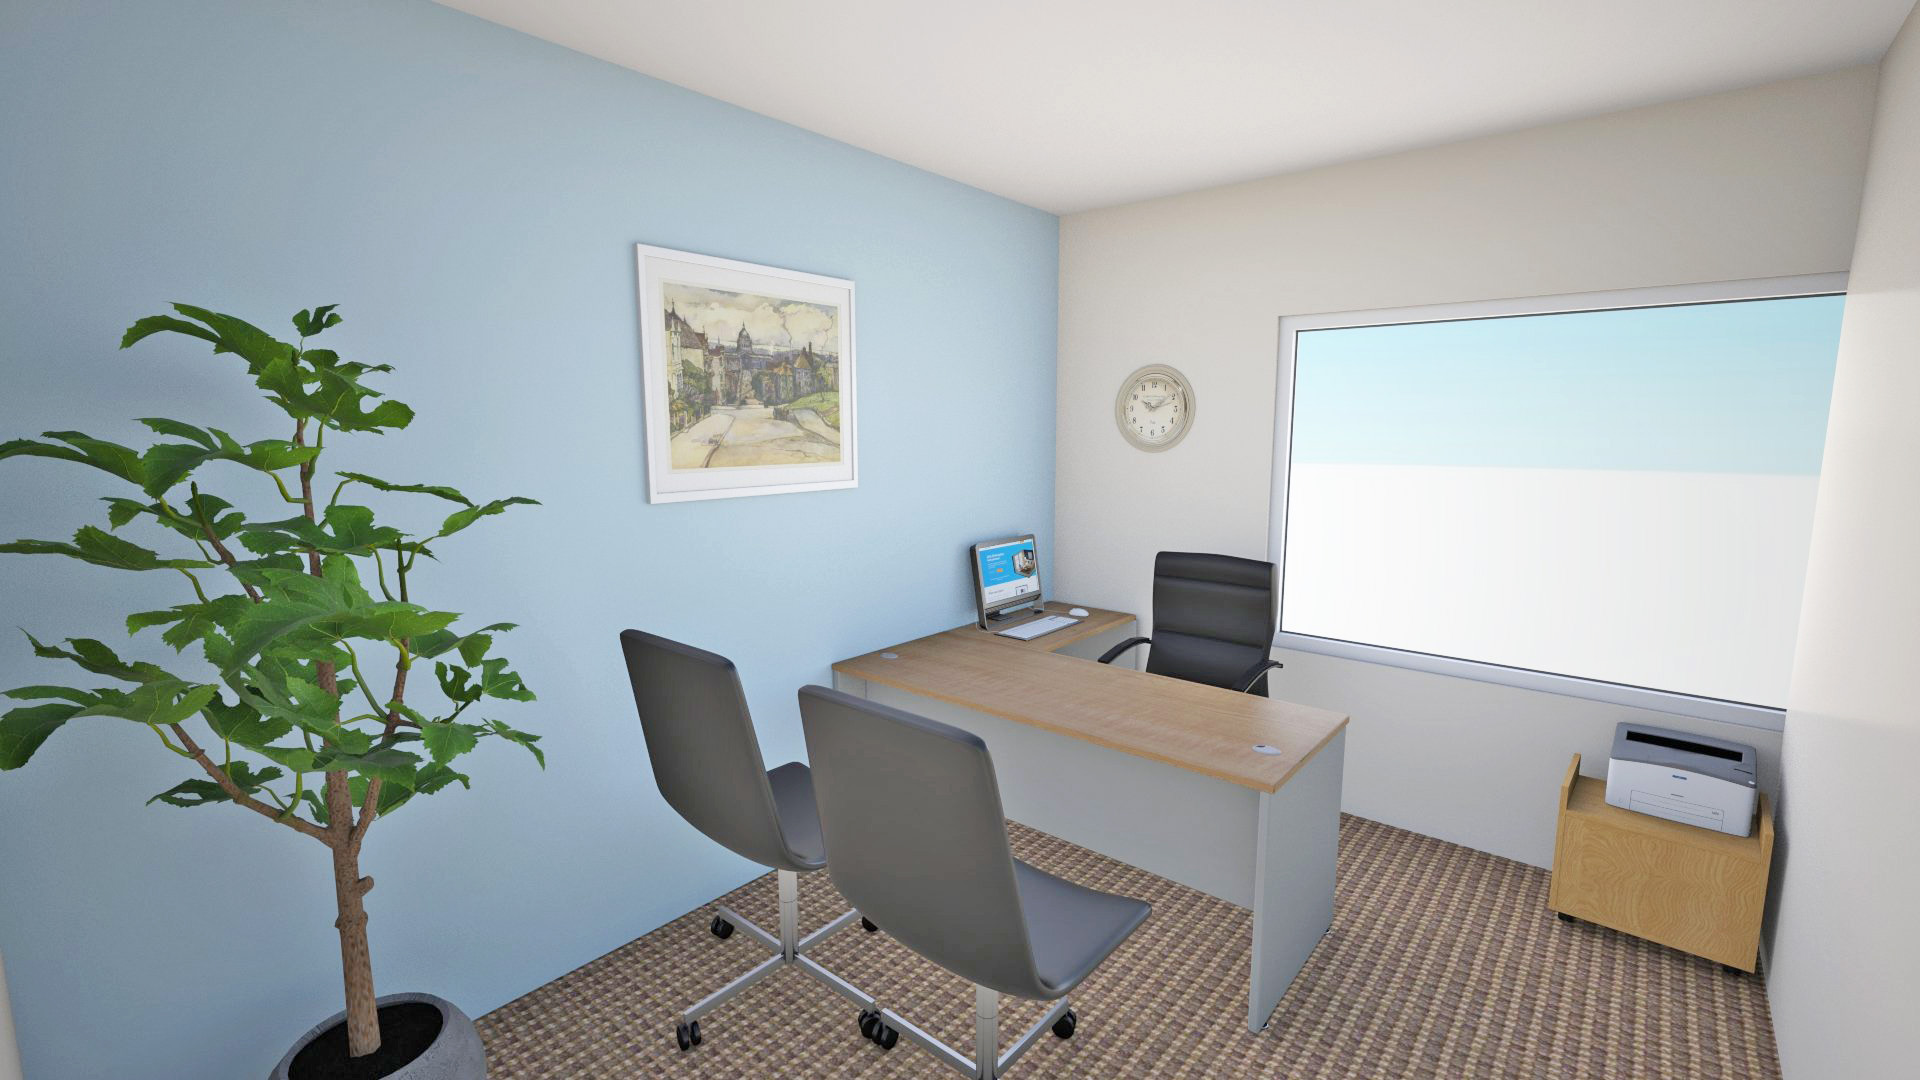 Executive Suites in Kennewick